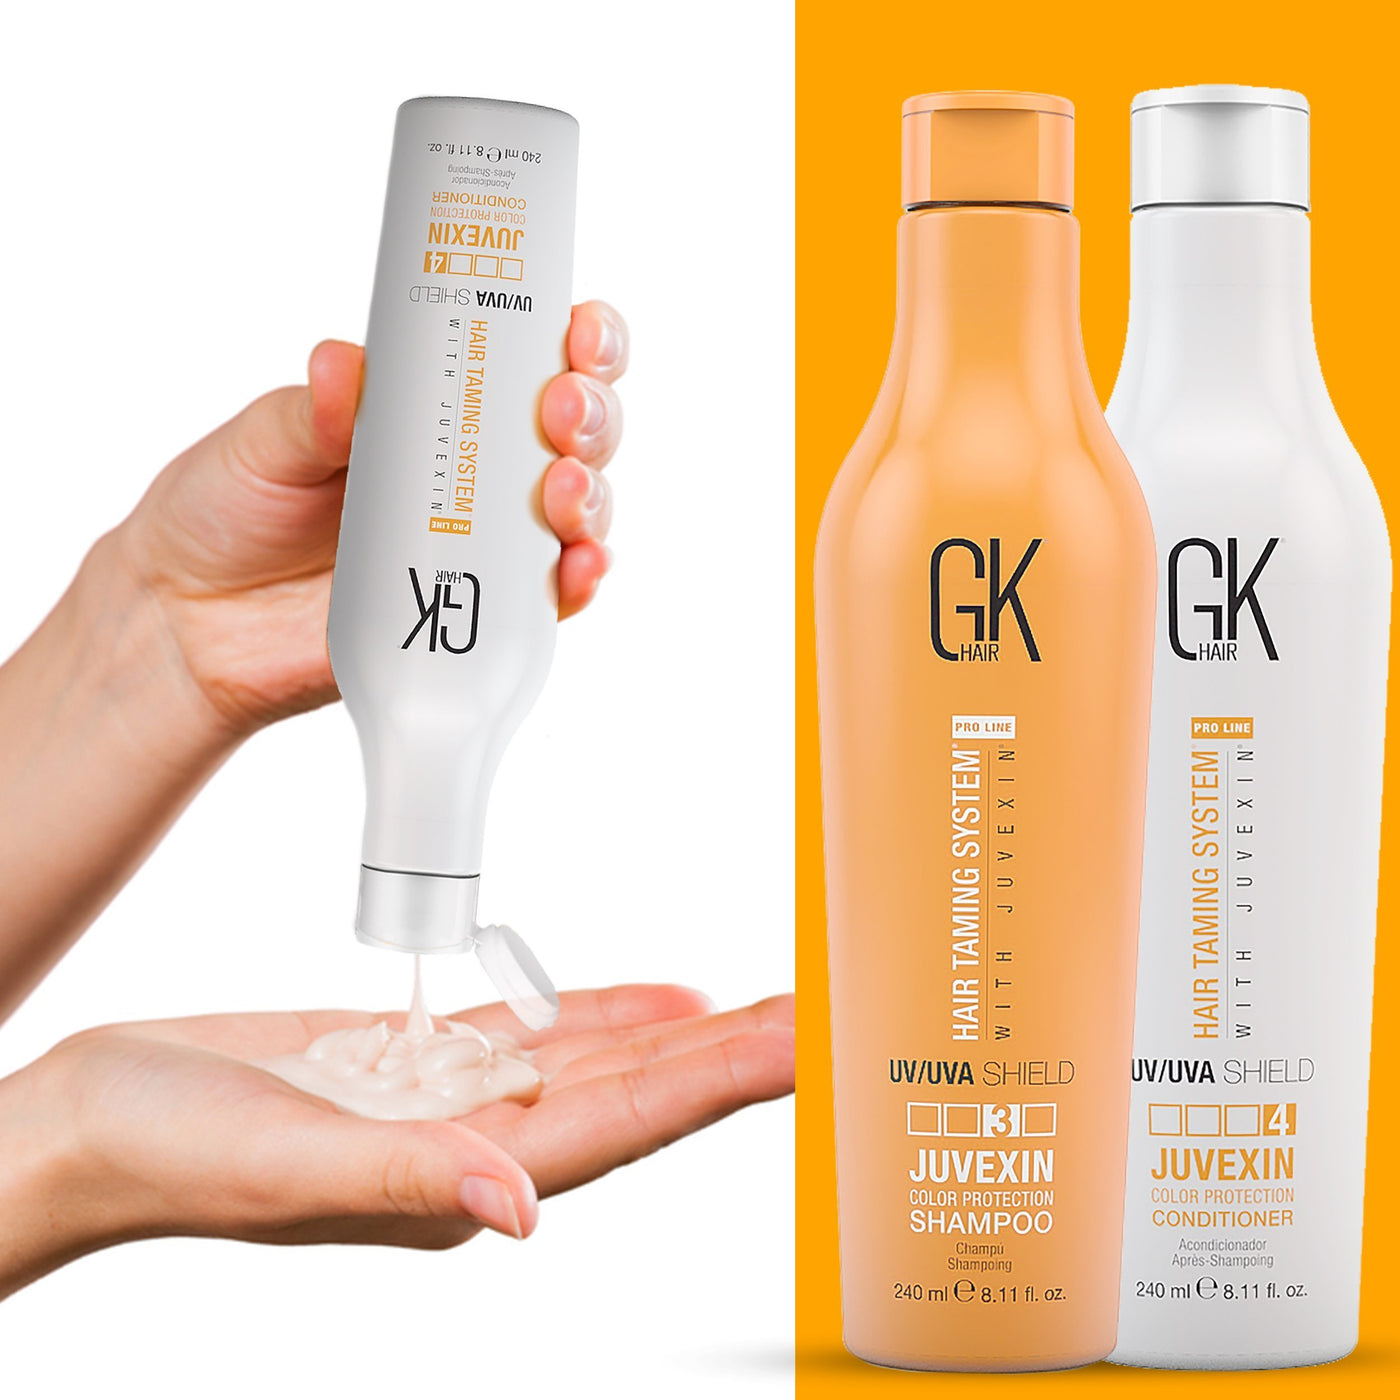 GK Hair Shield Shampoo and Conditioner | juvexin